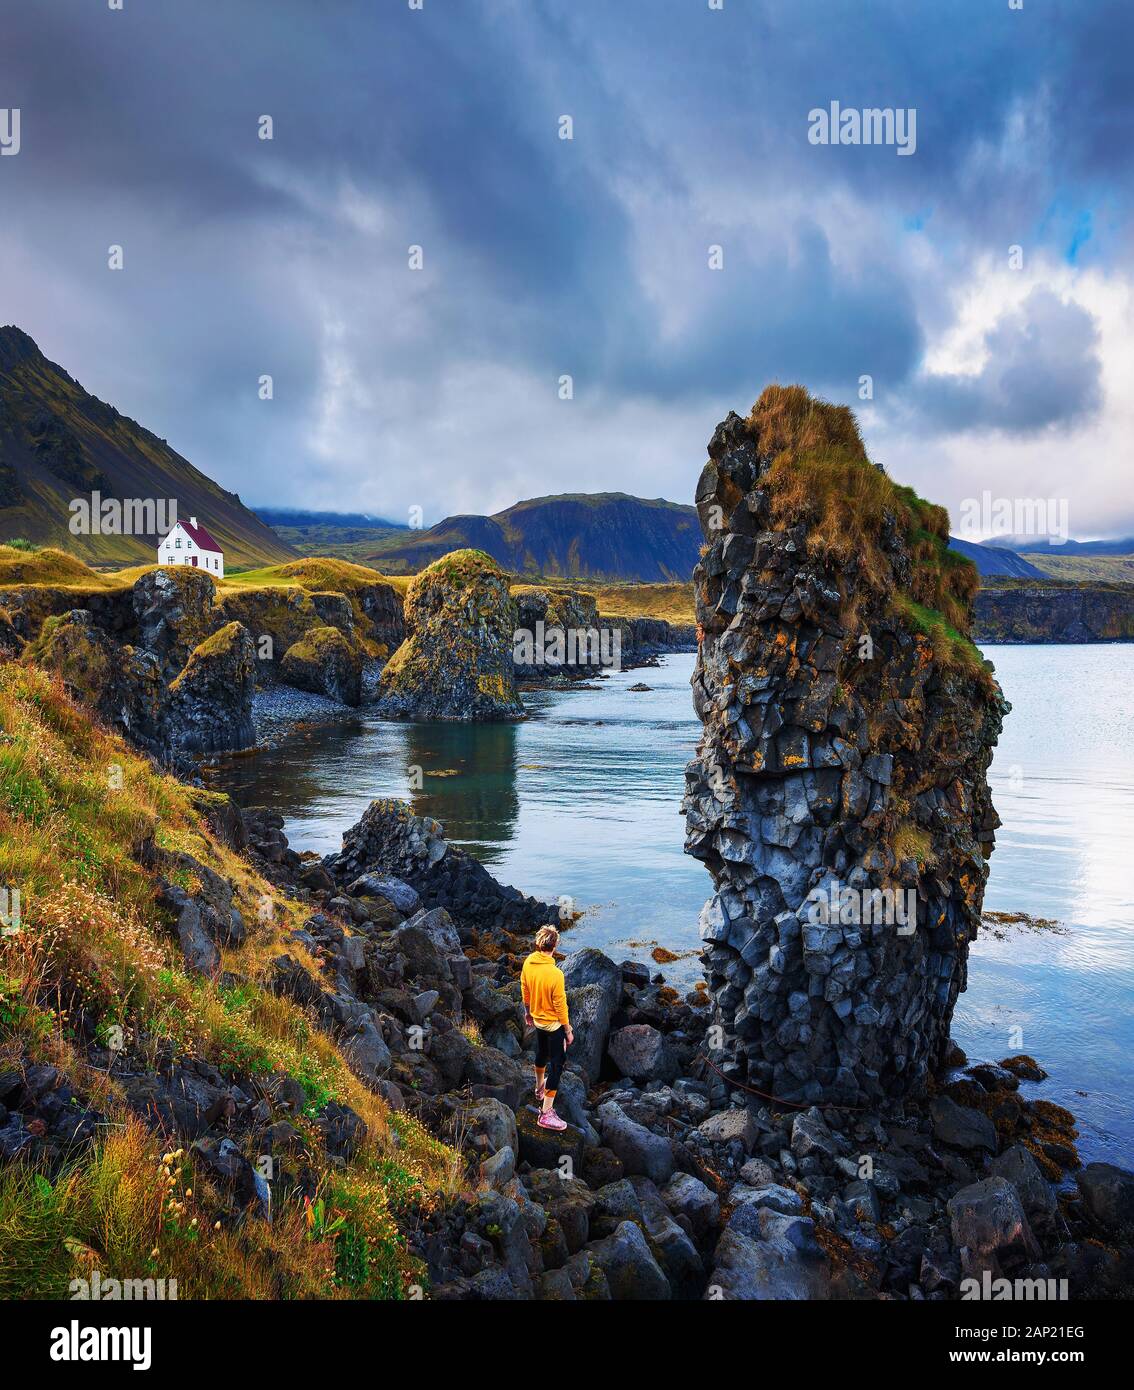 Tourist on a rocky beach looks at a small house in Arnarstapi, Iceland Stock Photo